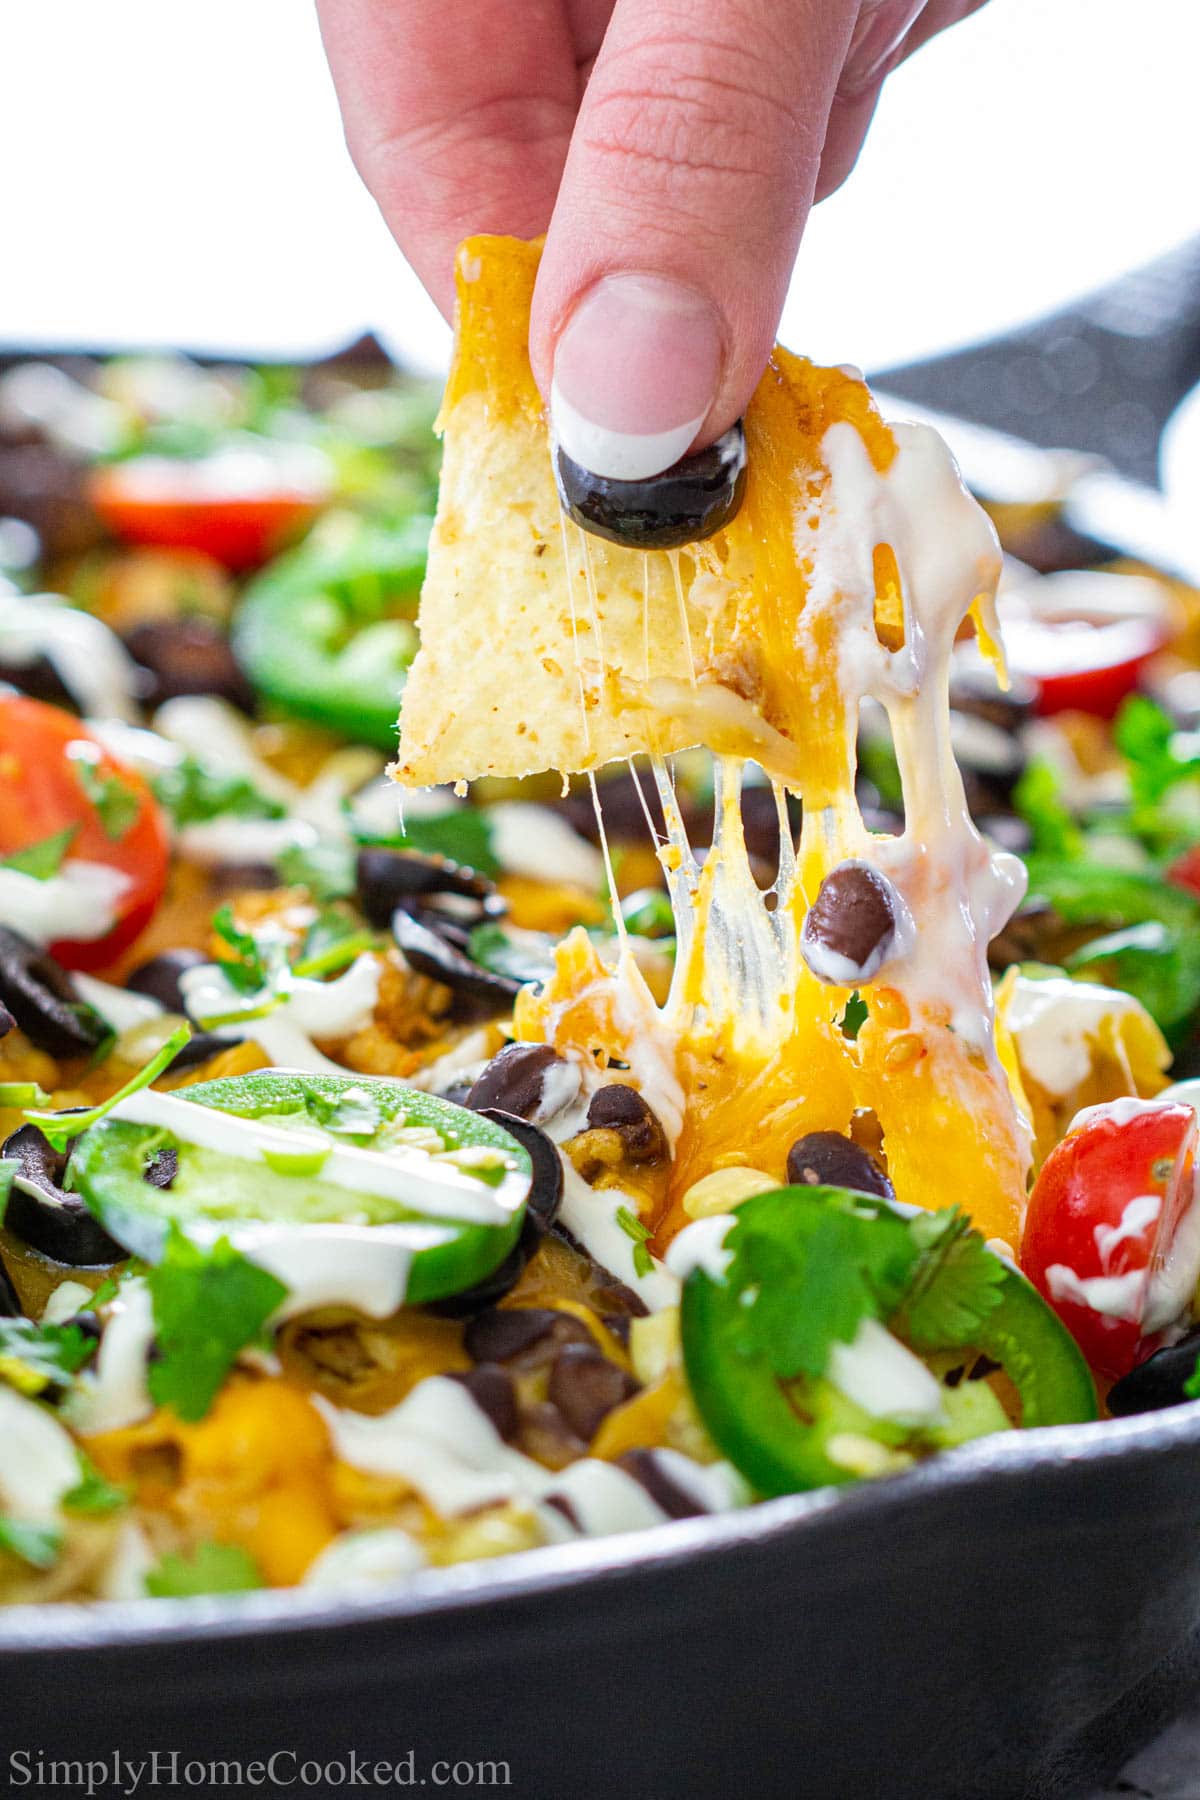 Hand lifting one chip with melted cheese from a skillet of Loaded Chicken Nachos.